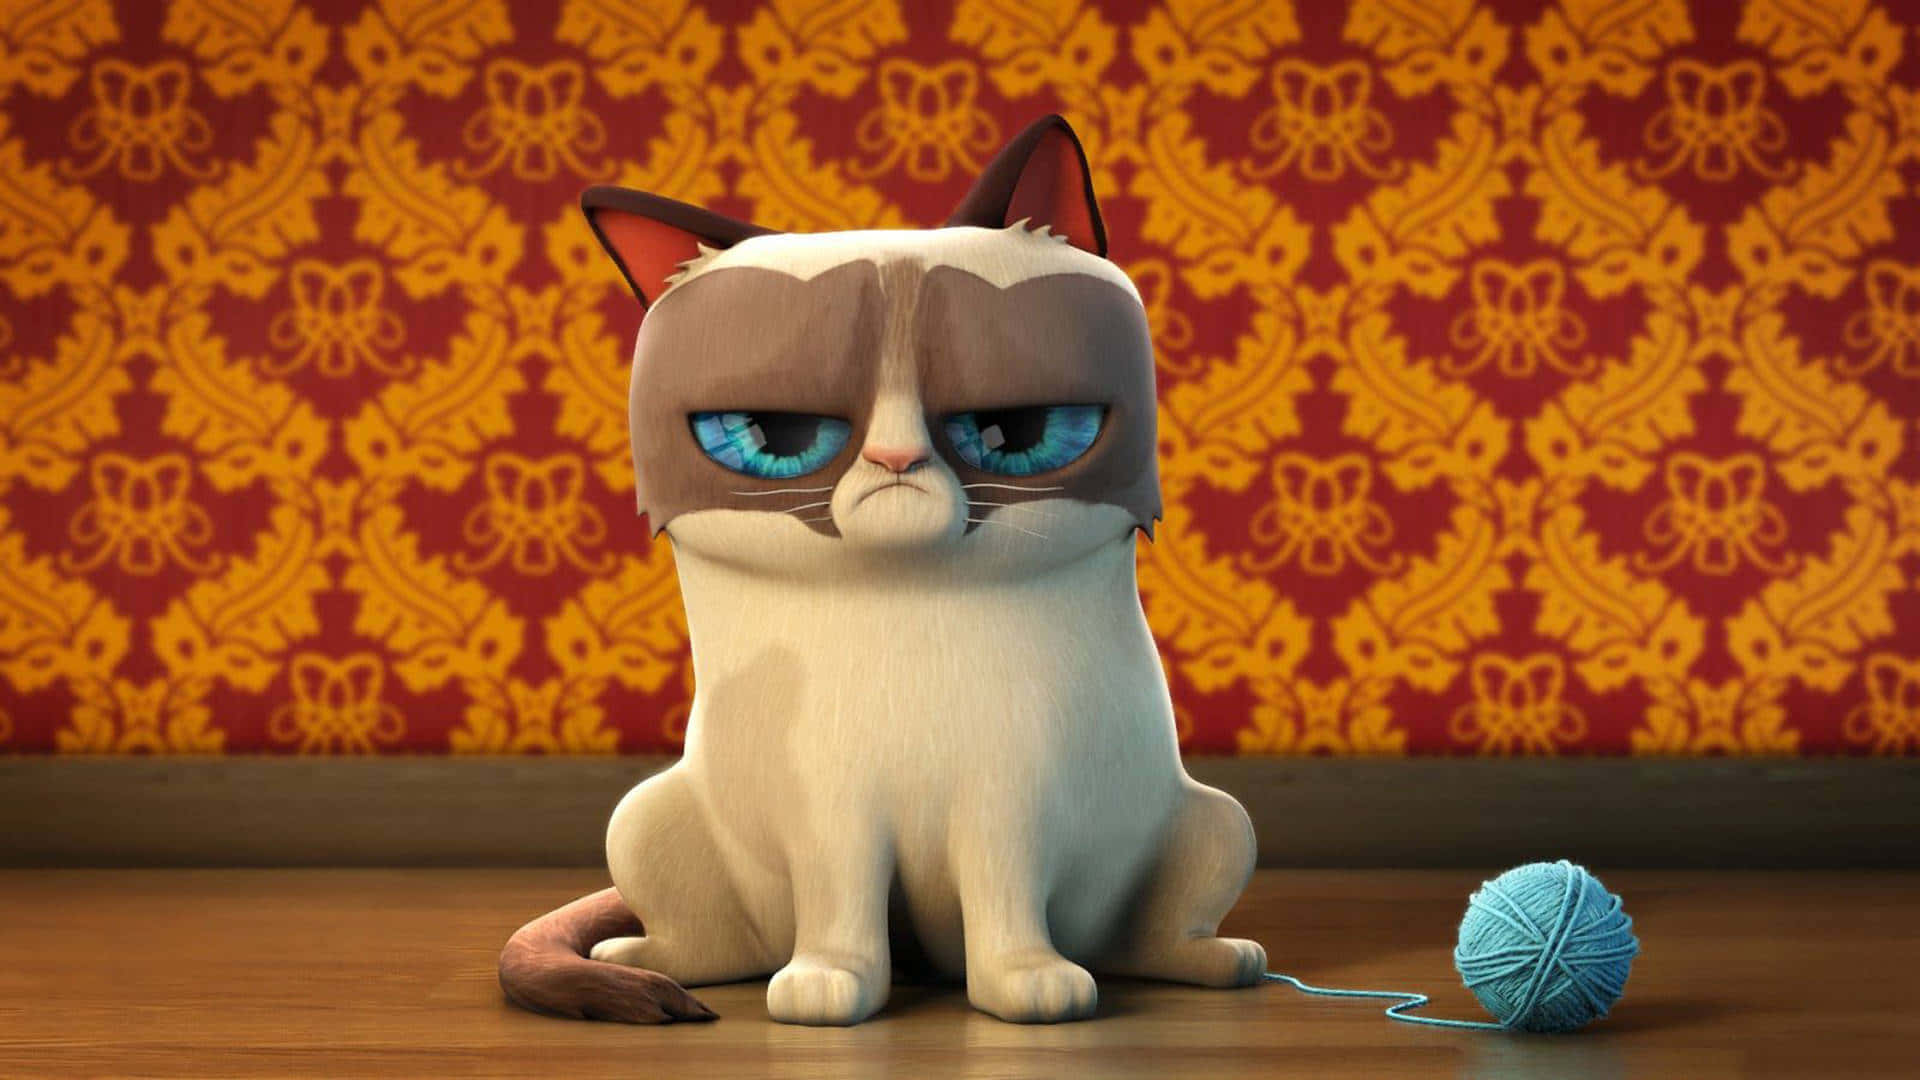 Grumpy Cat Sitting On A Wooden Floor With A Ball Of Yarn